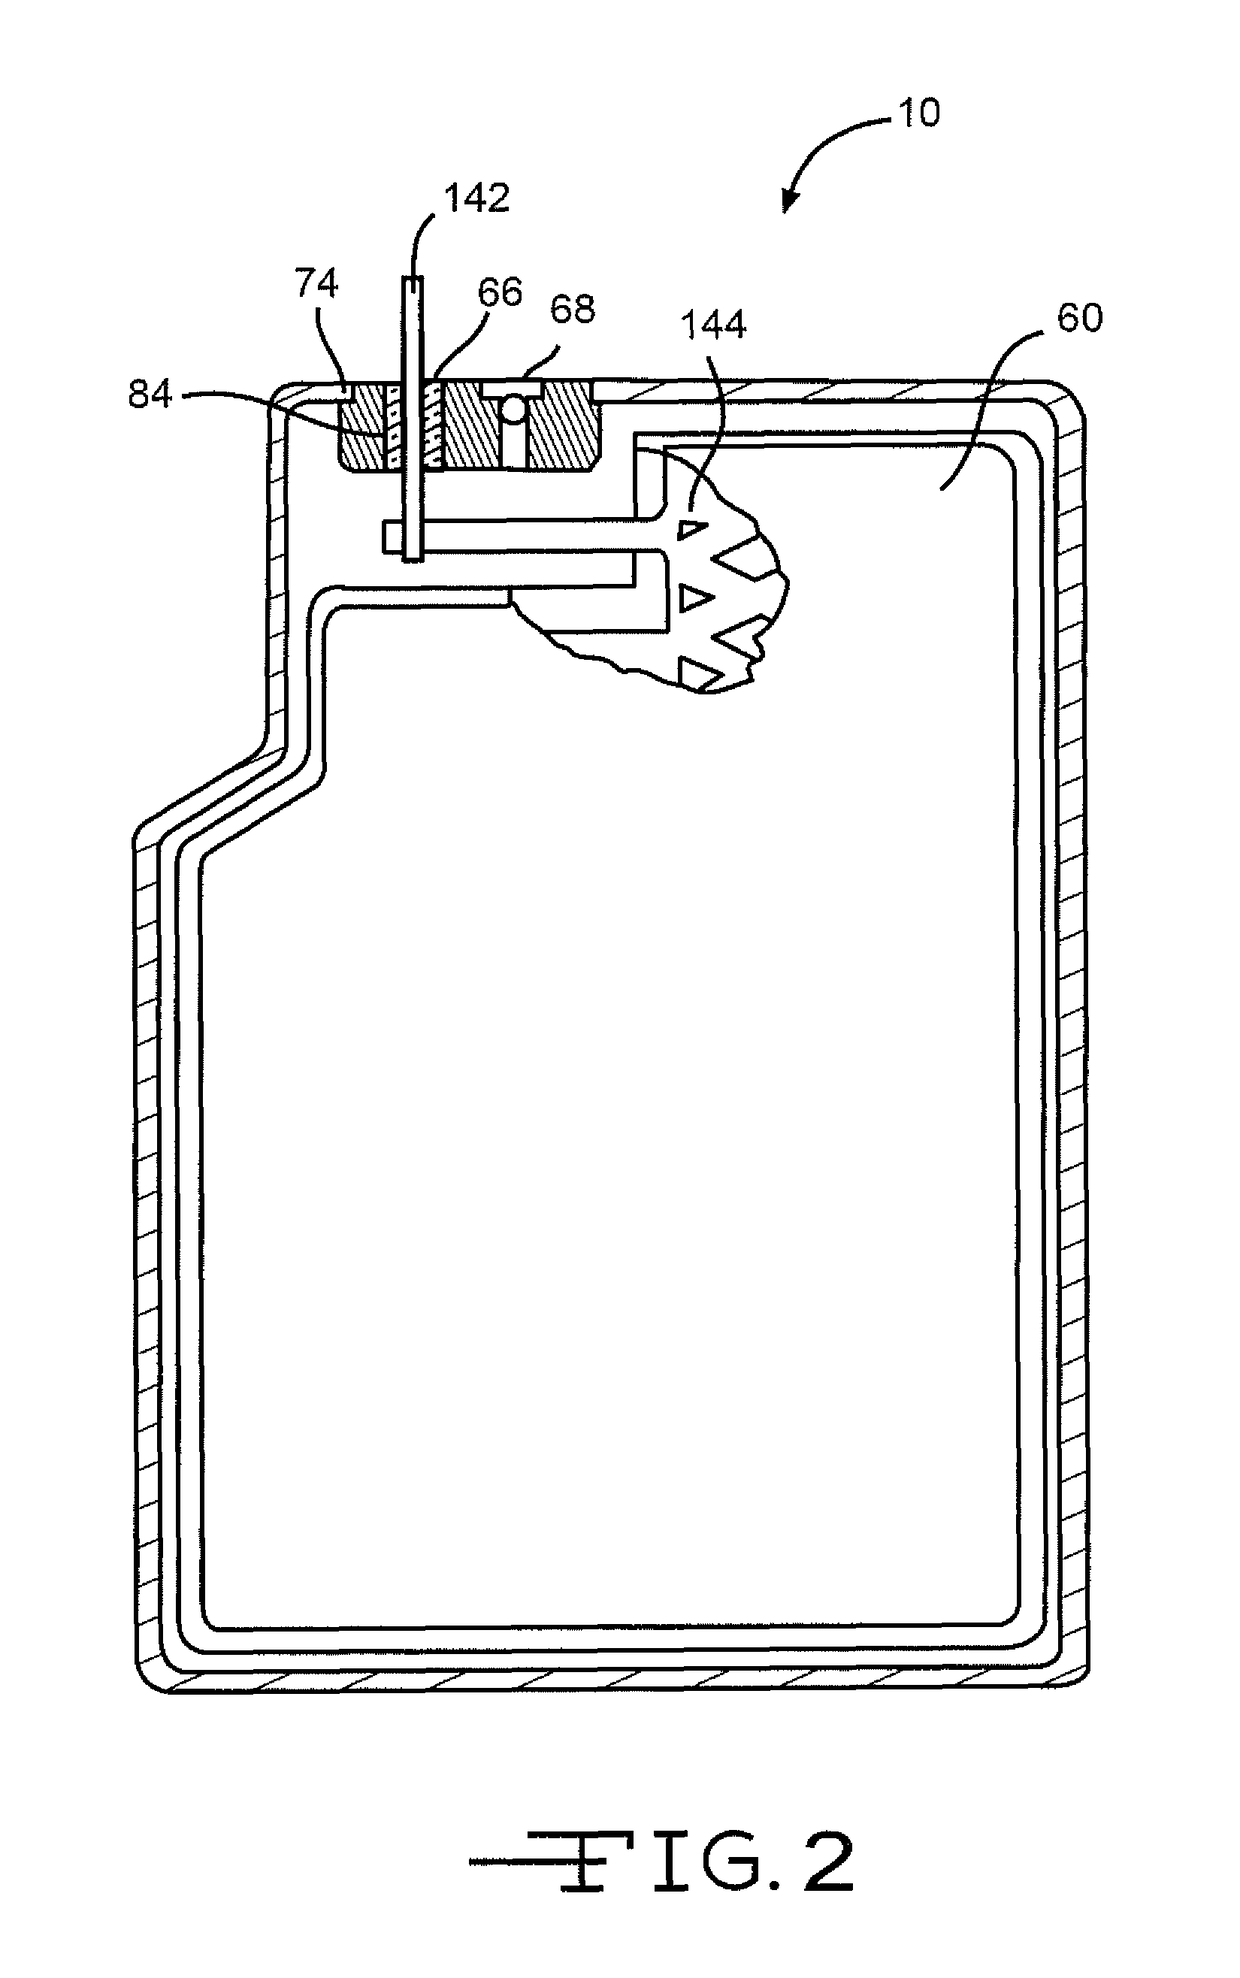 Dual weld plug for an electrochemical cell